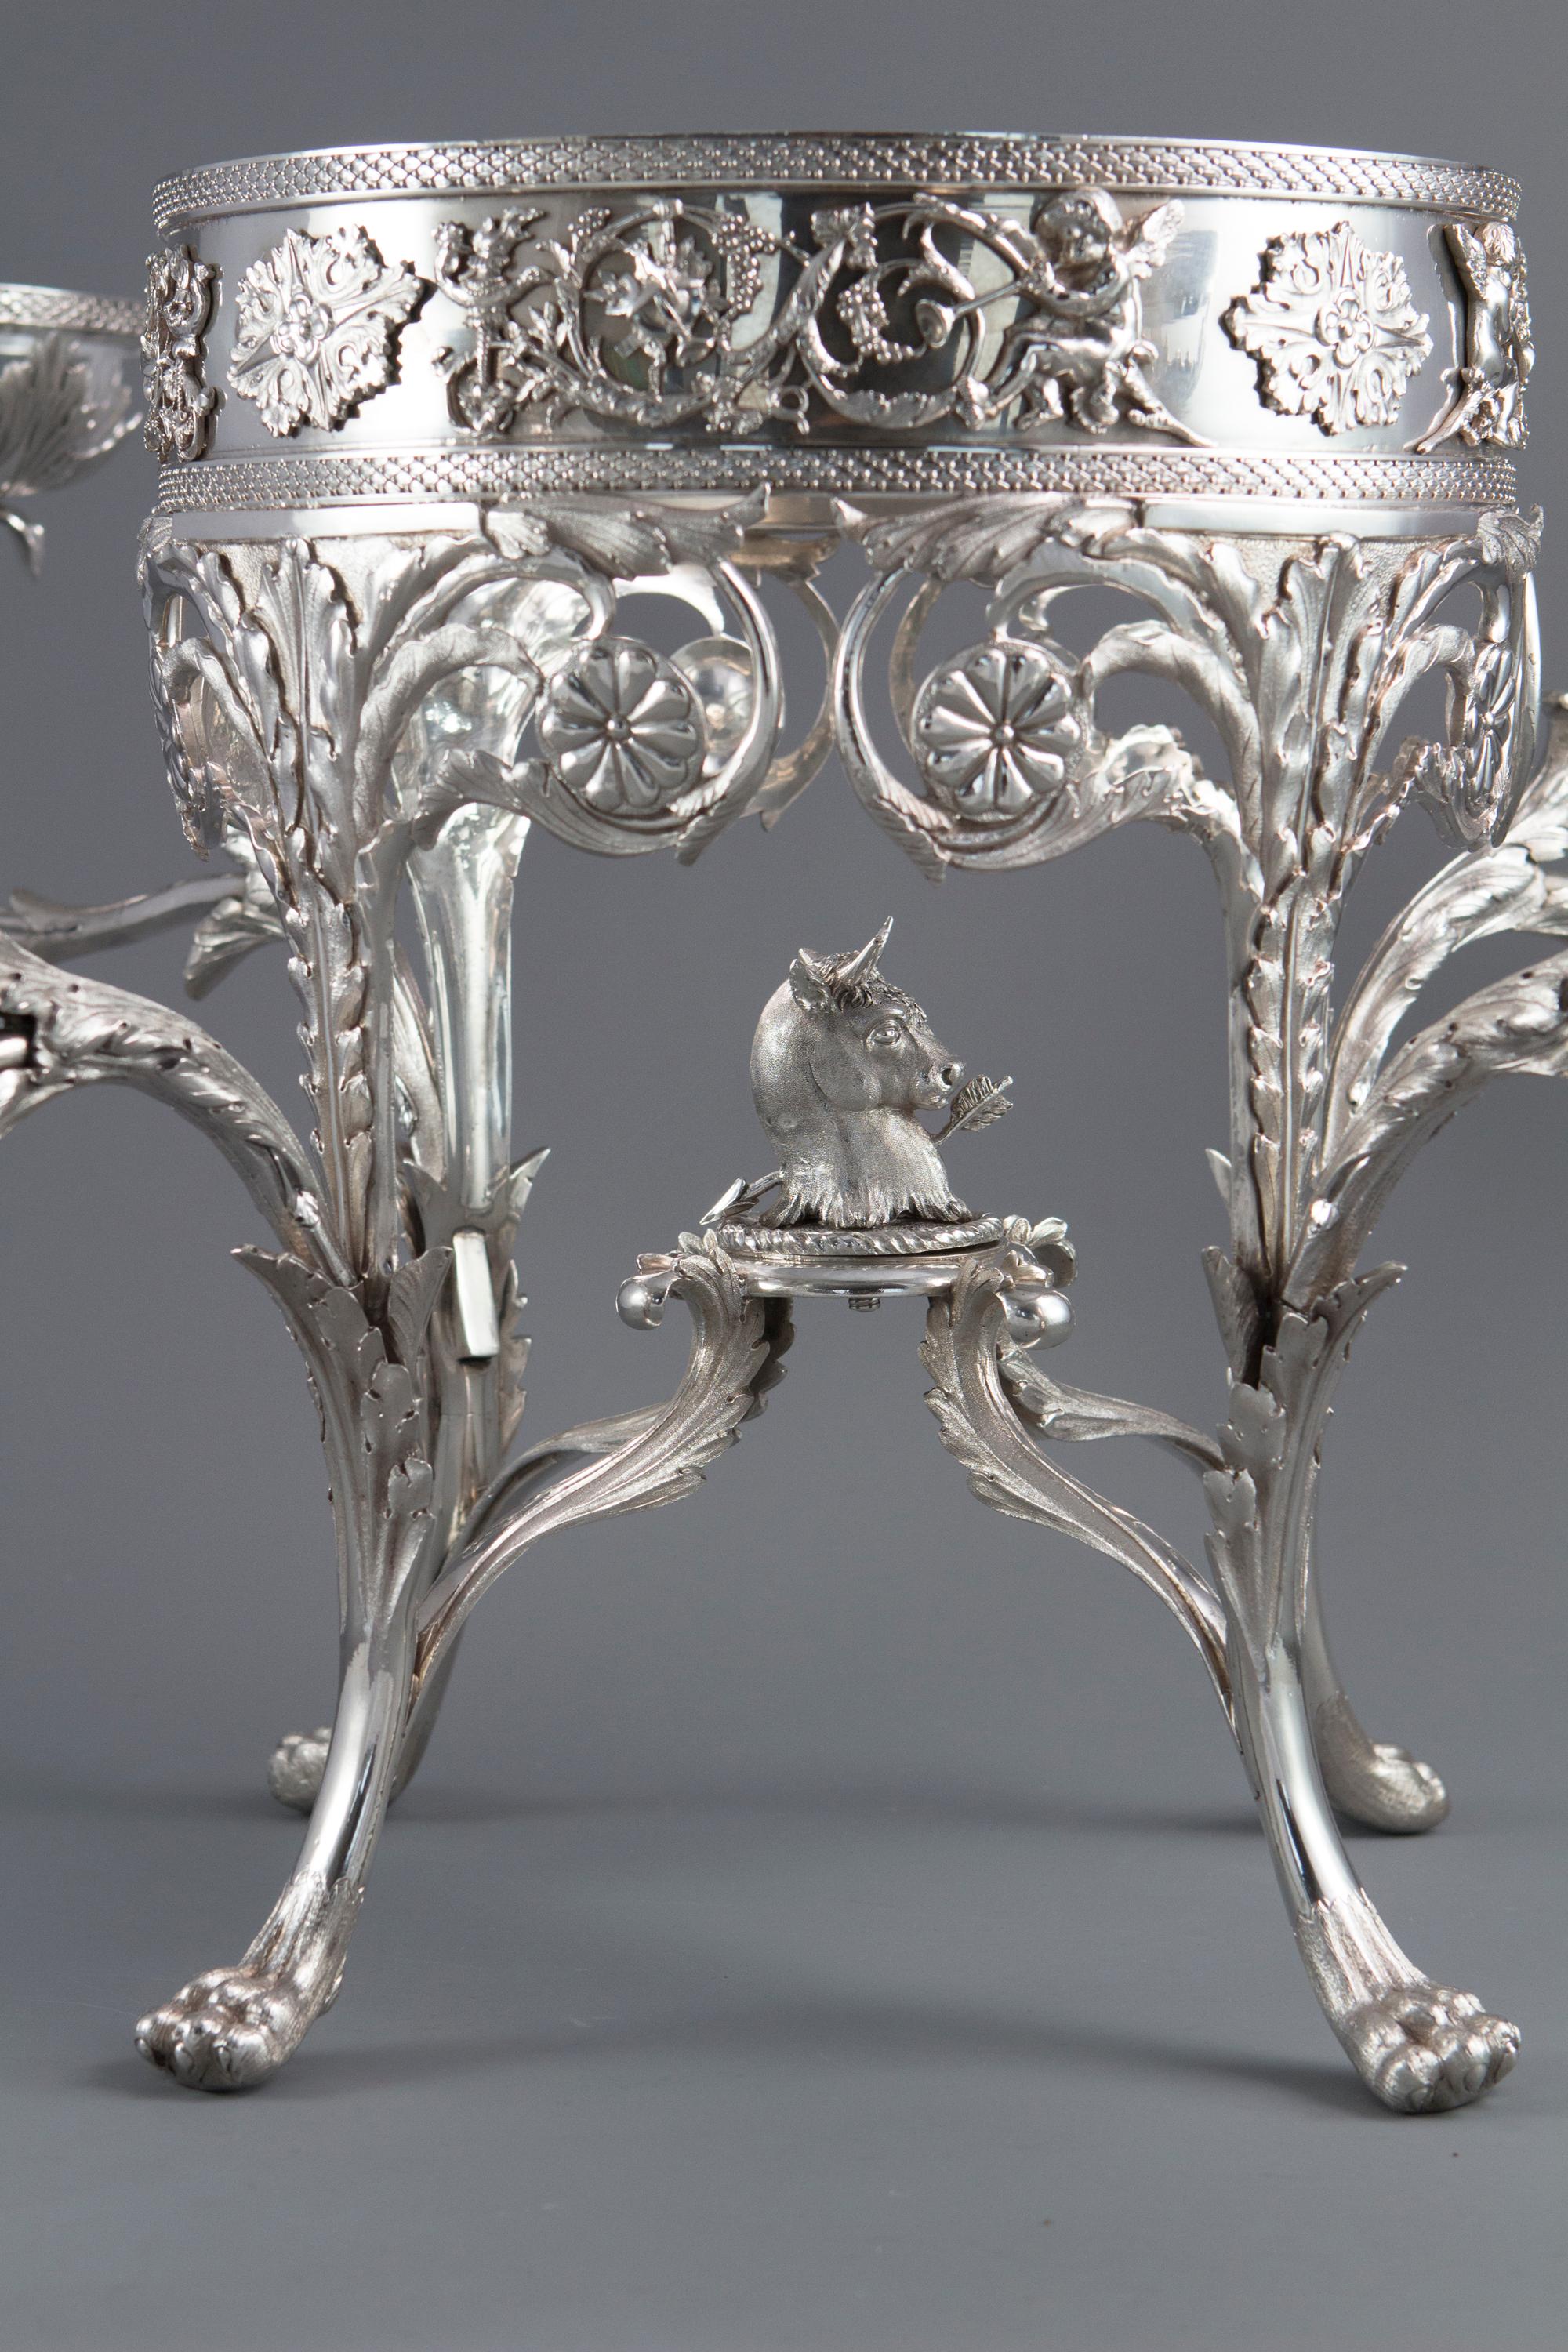 Early 19th Century George III Silver Epergne, London 1808 by William Pitts For Sale